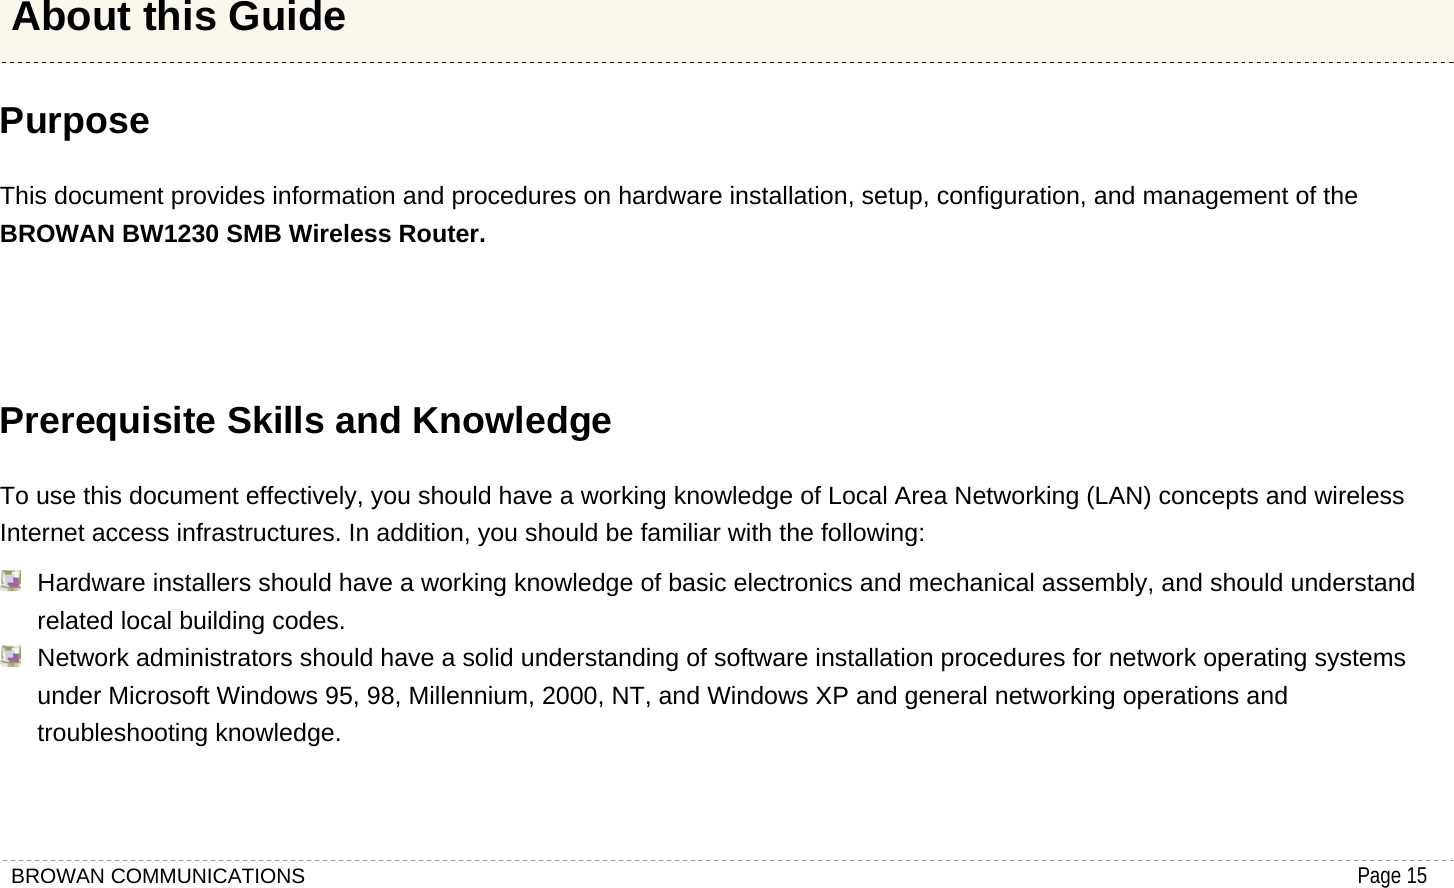 BROWAN COMMUNICATIONS                                                                                           Page 15  Purpose This document provides information and procedures on hardware installation, setup, configuration, and management of the BROWAN BW1230 SMB Wireless Router.    Prerequisite Skills and Knowledge To use this document effectively, you should have a working knowledge of Local Area Networking (LAN) concepts and wireless Internet access infrastructures. In addition, you should be familiar with the following:   Hardware installers should have a working knowledge of basic electronics and mechanical assembly, and should understand related local building codes.   Network administrators should have a solid understanding of software installation procedures for network operating systems under Microsoft Windows 95, 98, Millennium, 2000, NT, and Windows XP and general networking operations and troubleshooting knowledge. About this Guide 